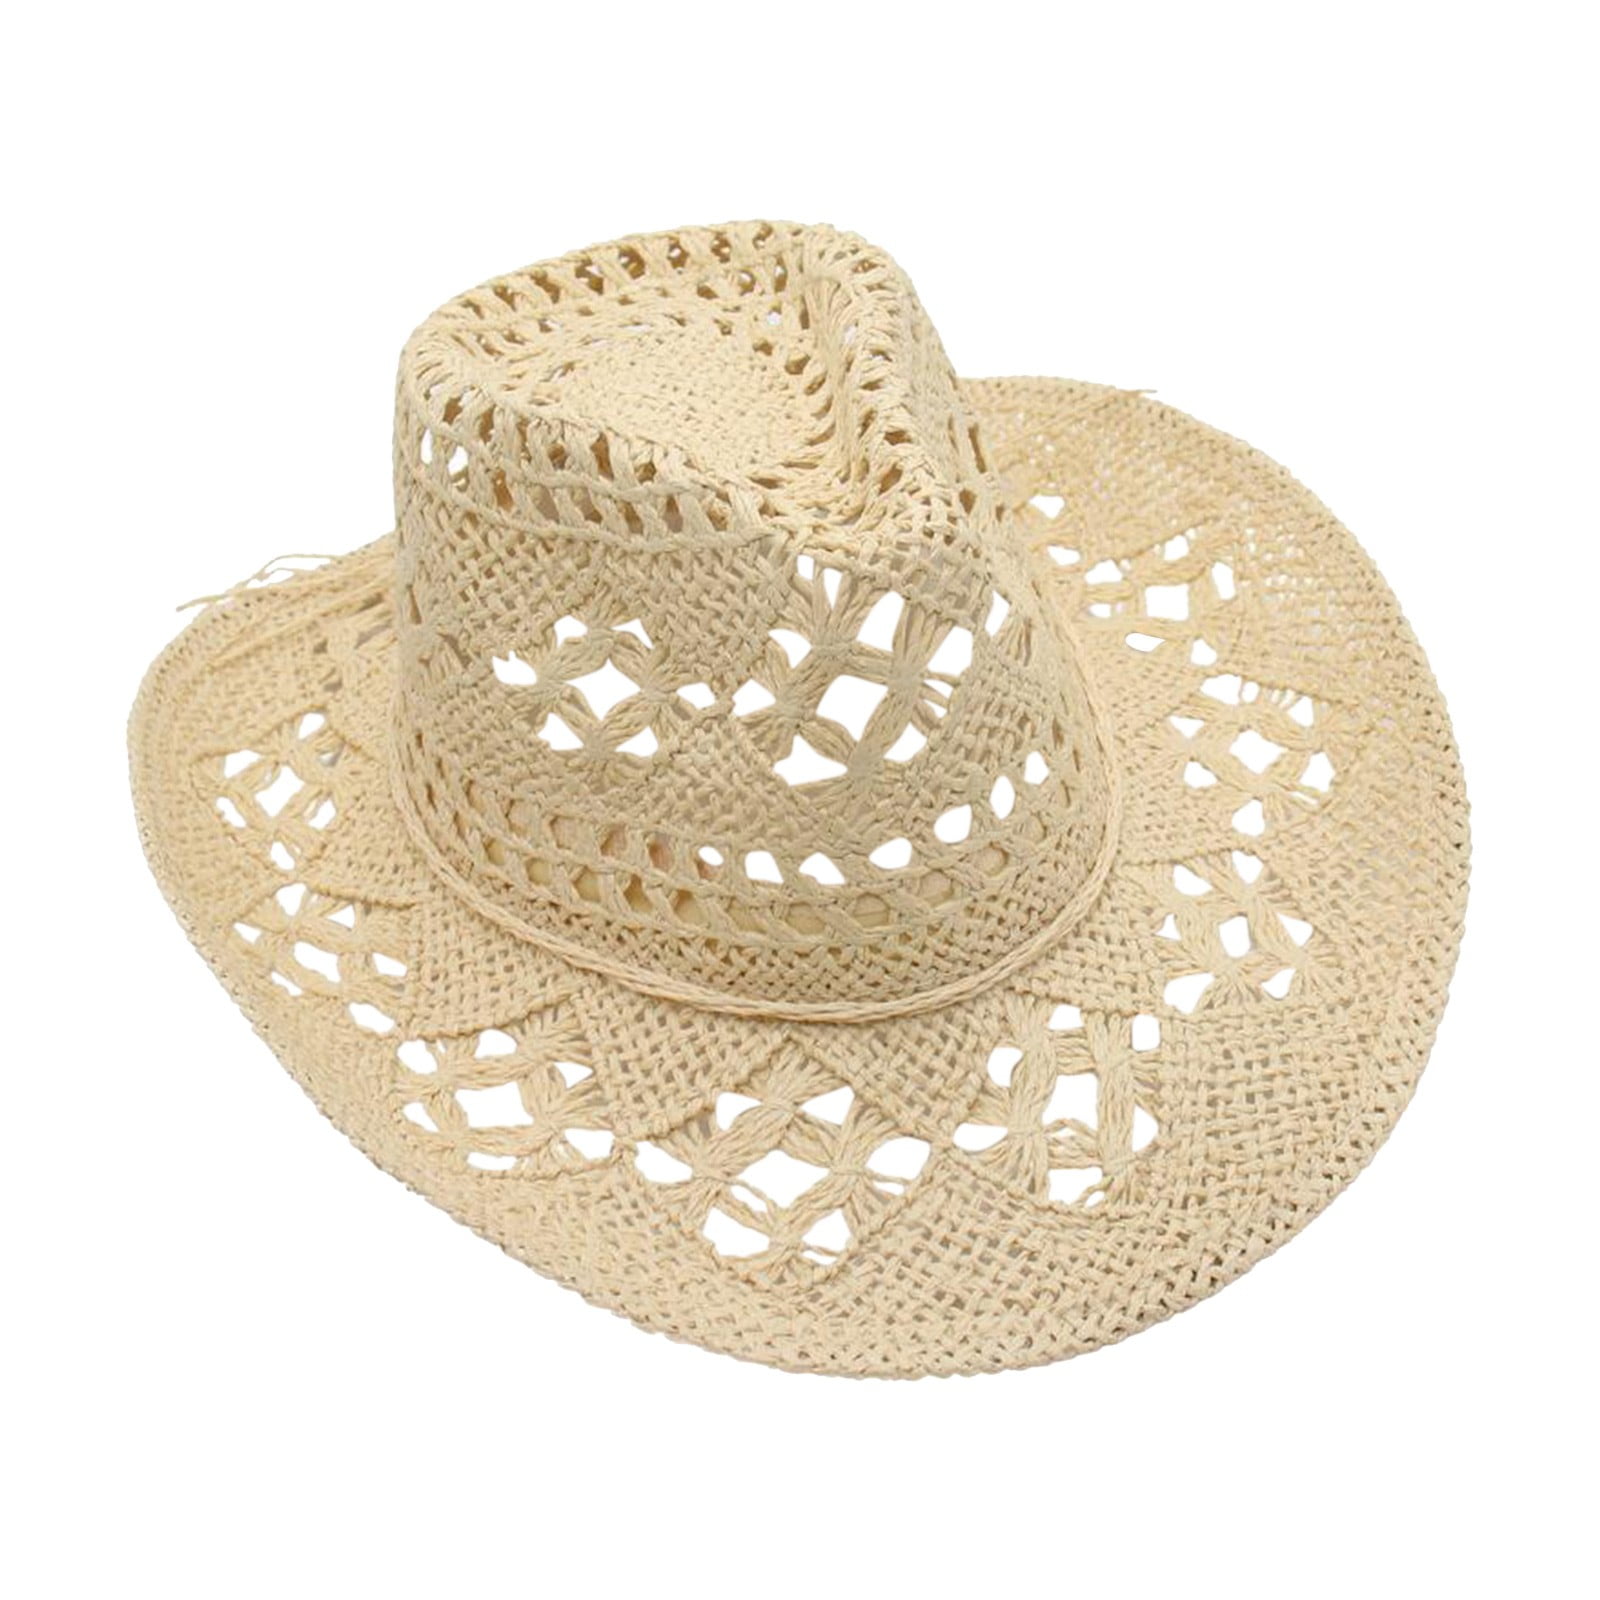 KDDYLITQ Straw Hats for Women Beach Wide Brim Woven Roll Up Wide Brim Hat  Hand Knitting Cowboy Cowgirl Hat Sun Hat with Uv Protection Xi Hollow Out